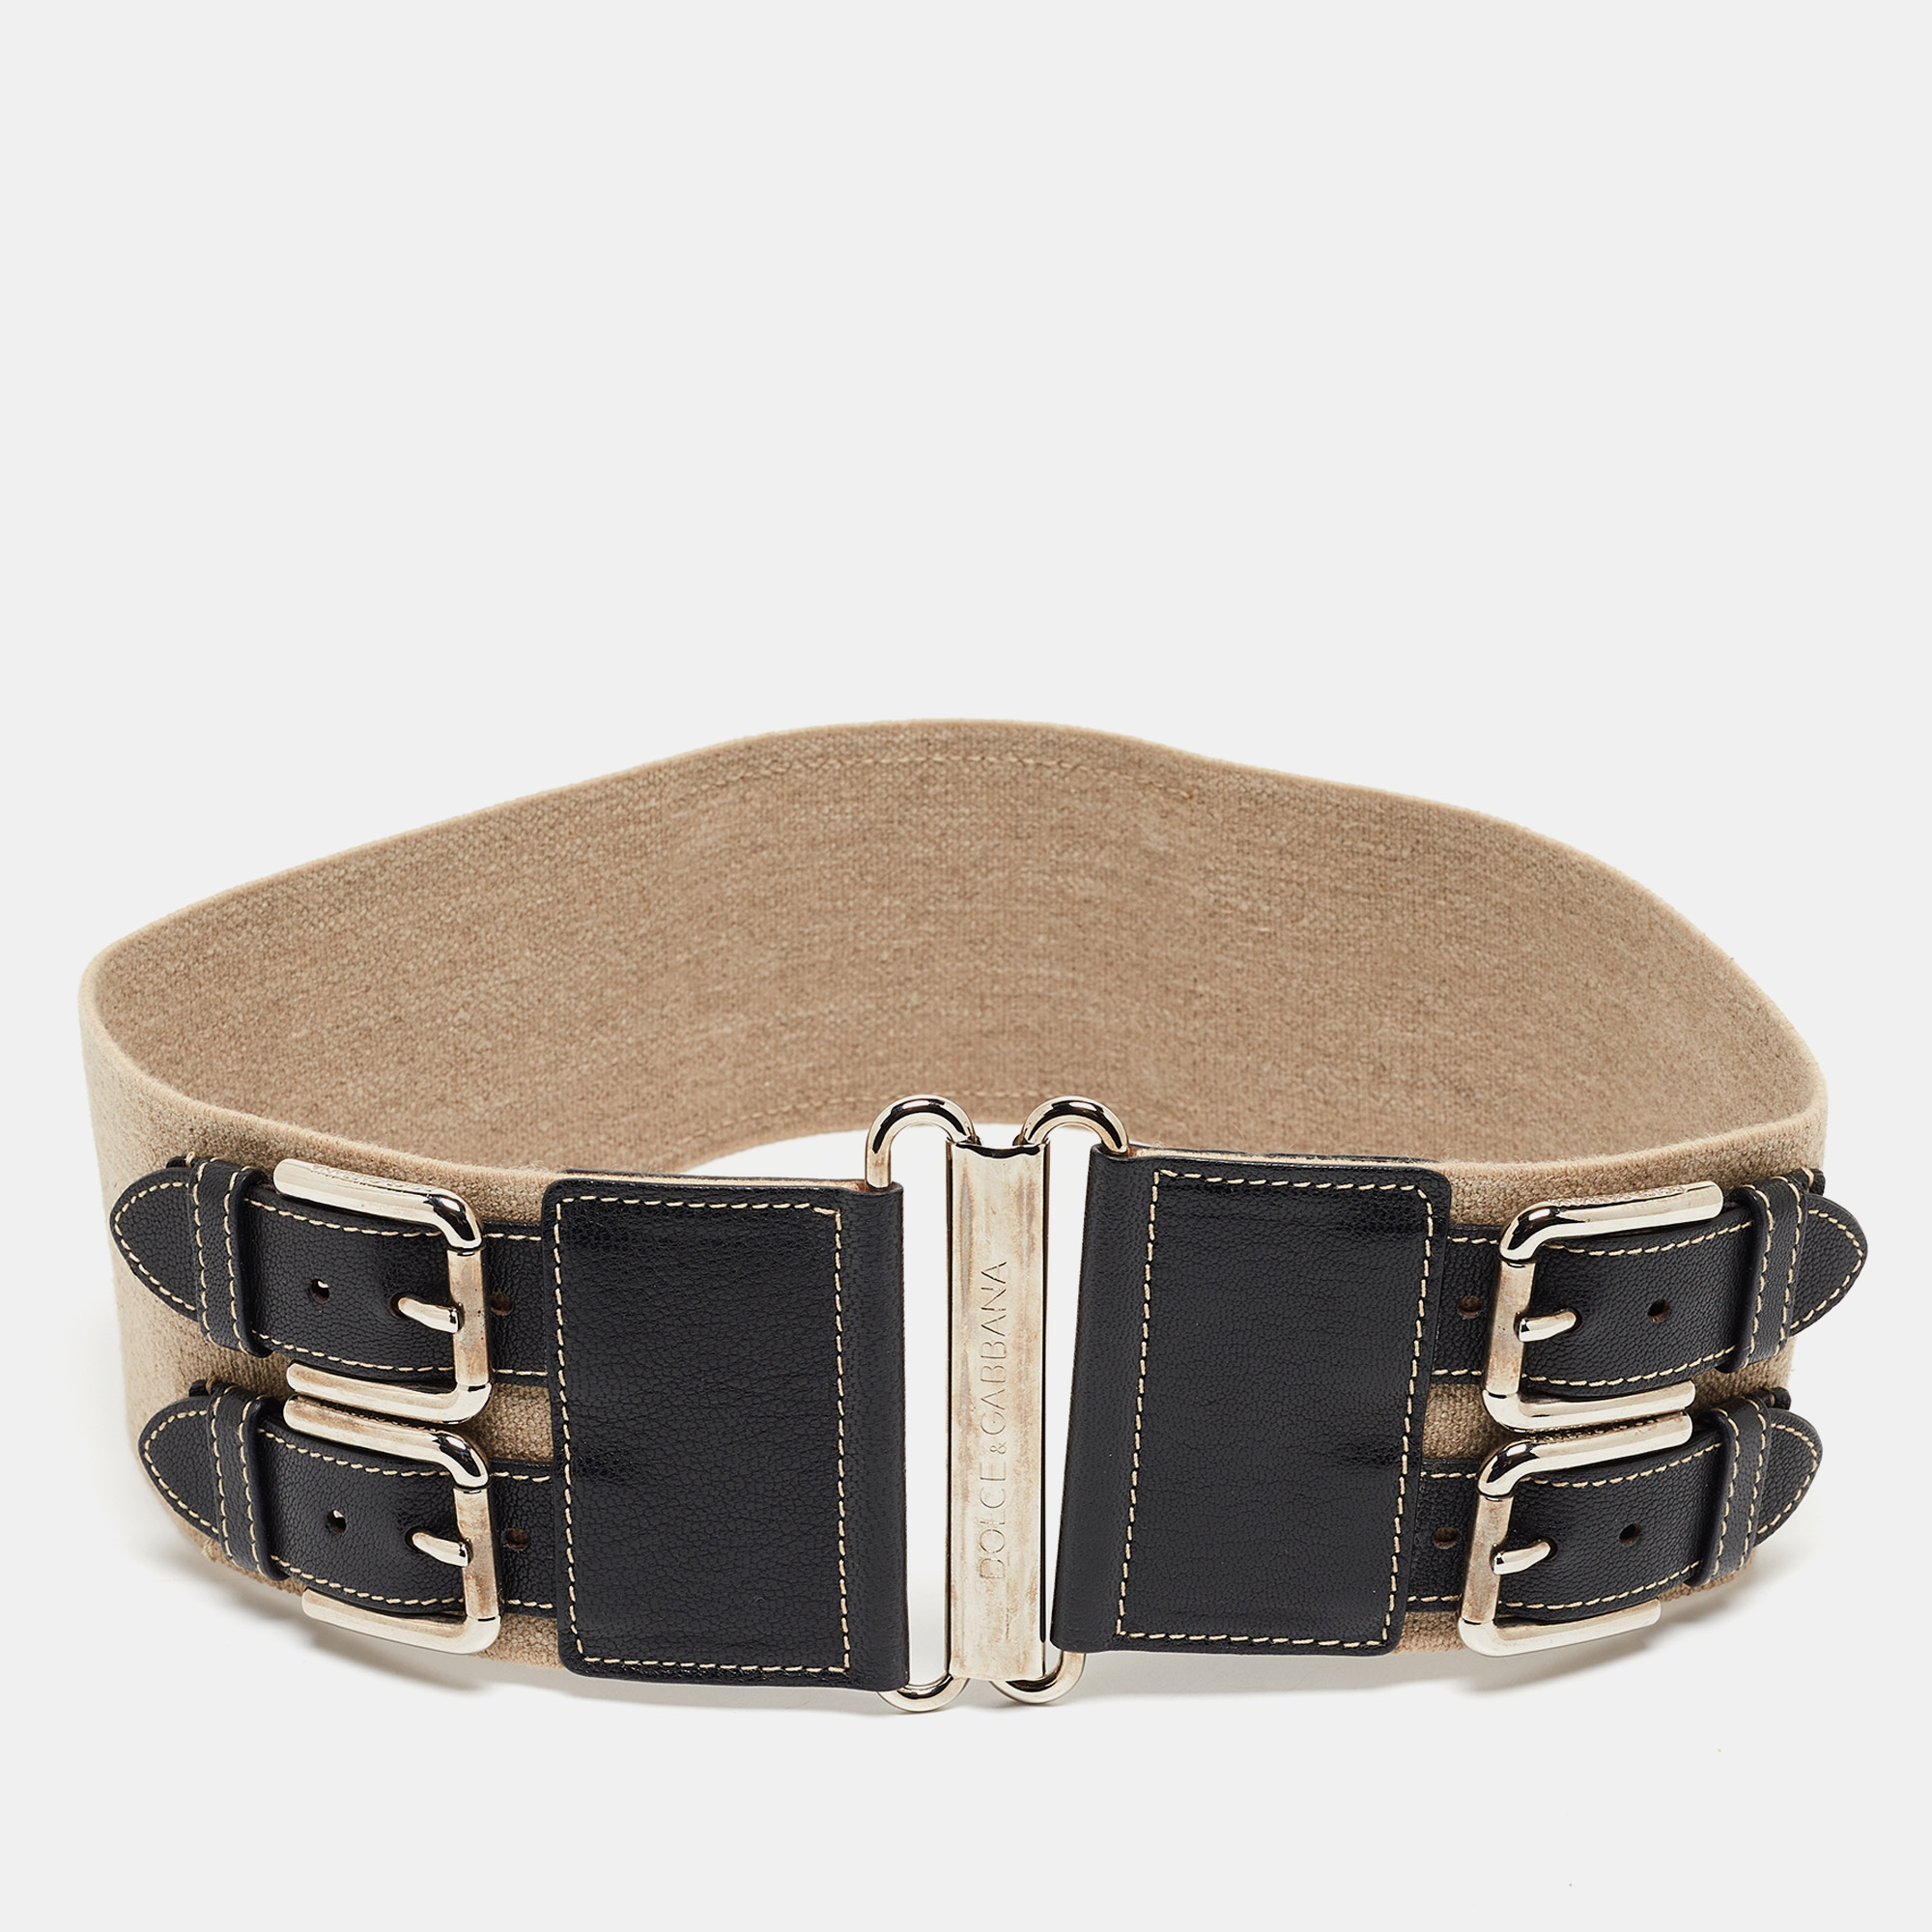 Dolce & gabbana beige/black elastic and leather double buckle wide belt 75cm